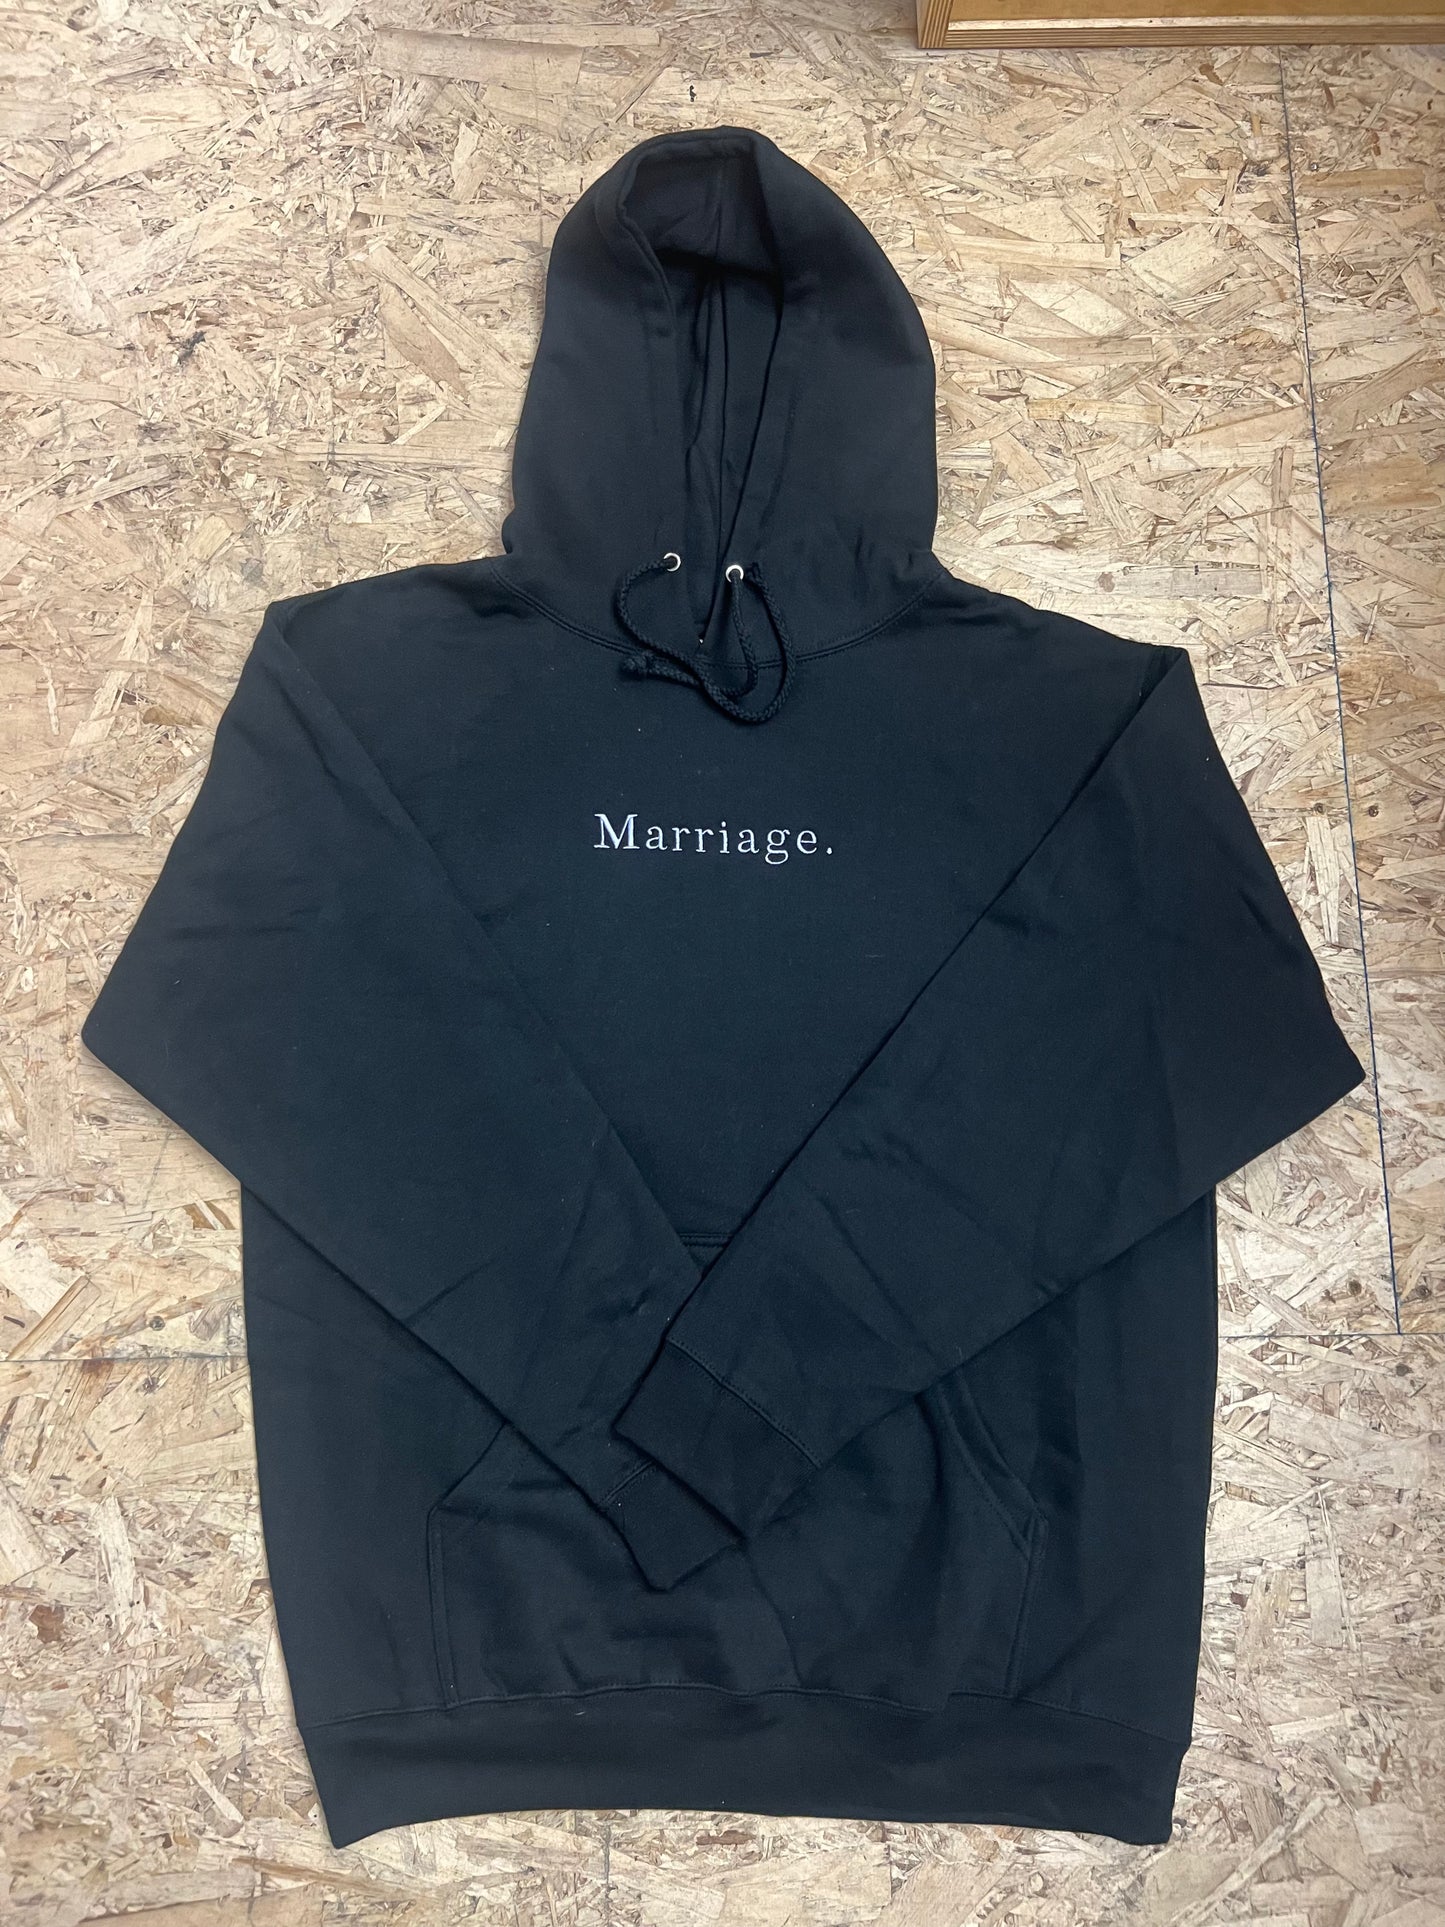 Marriage Embroidered Hoodie Black with Lilac stitching